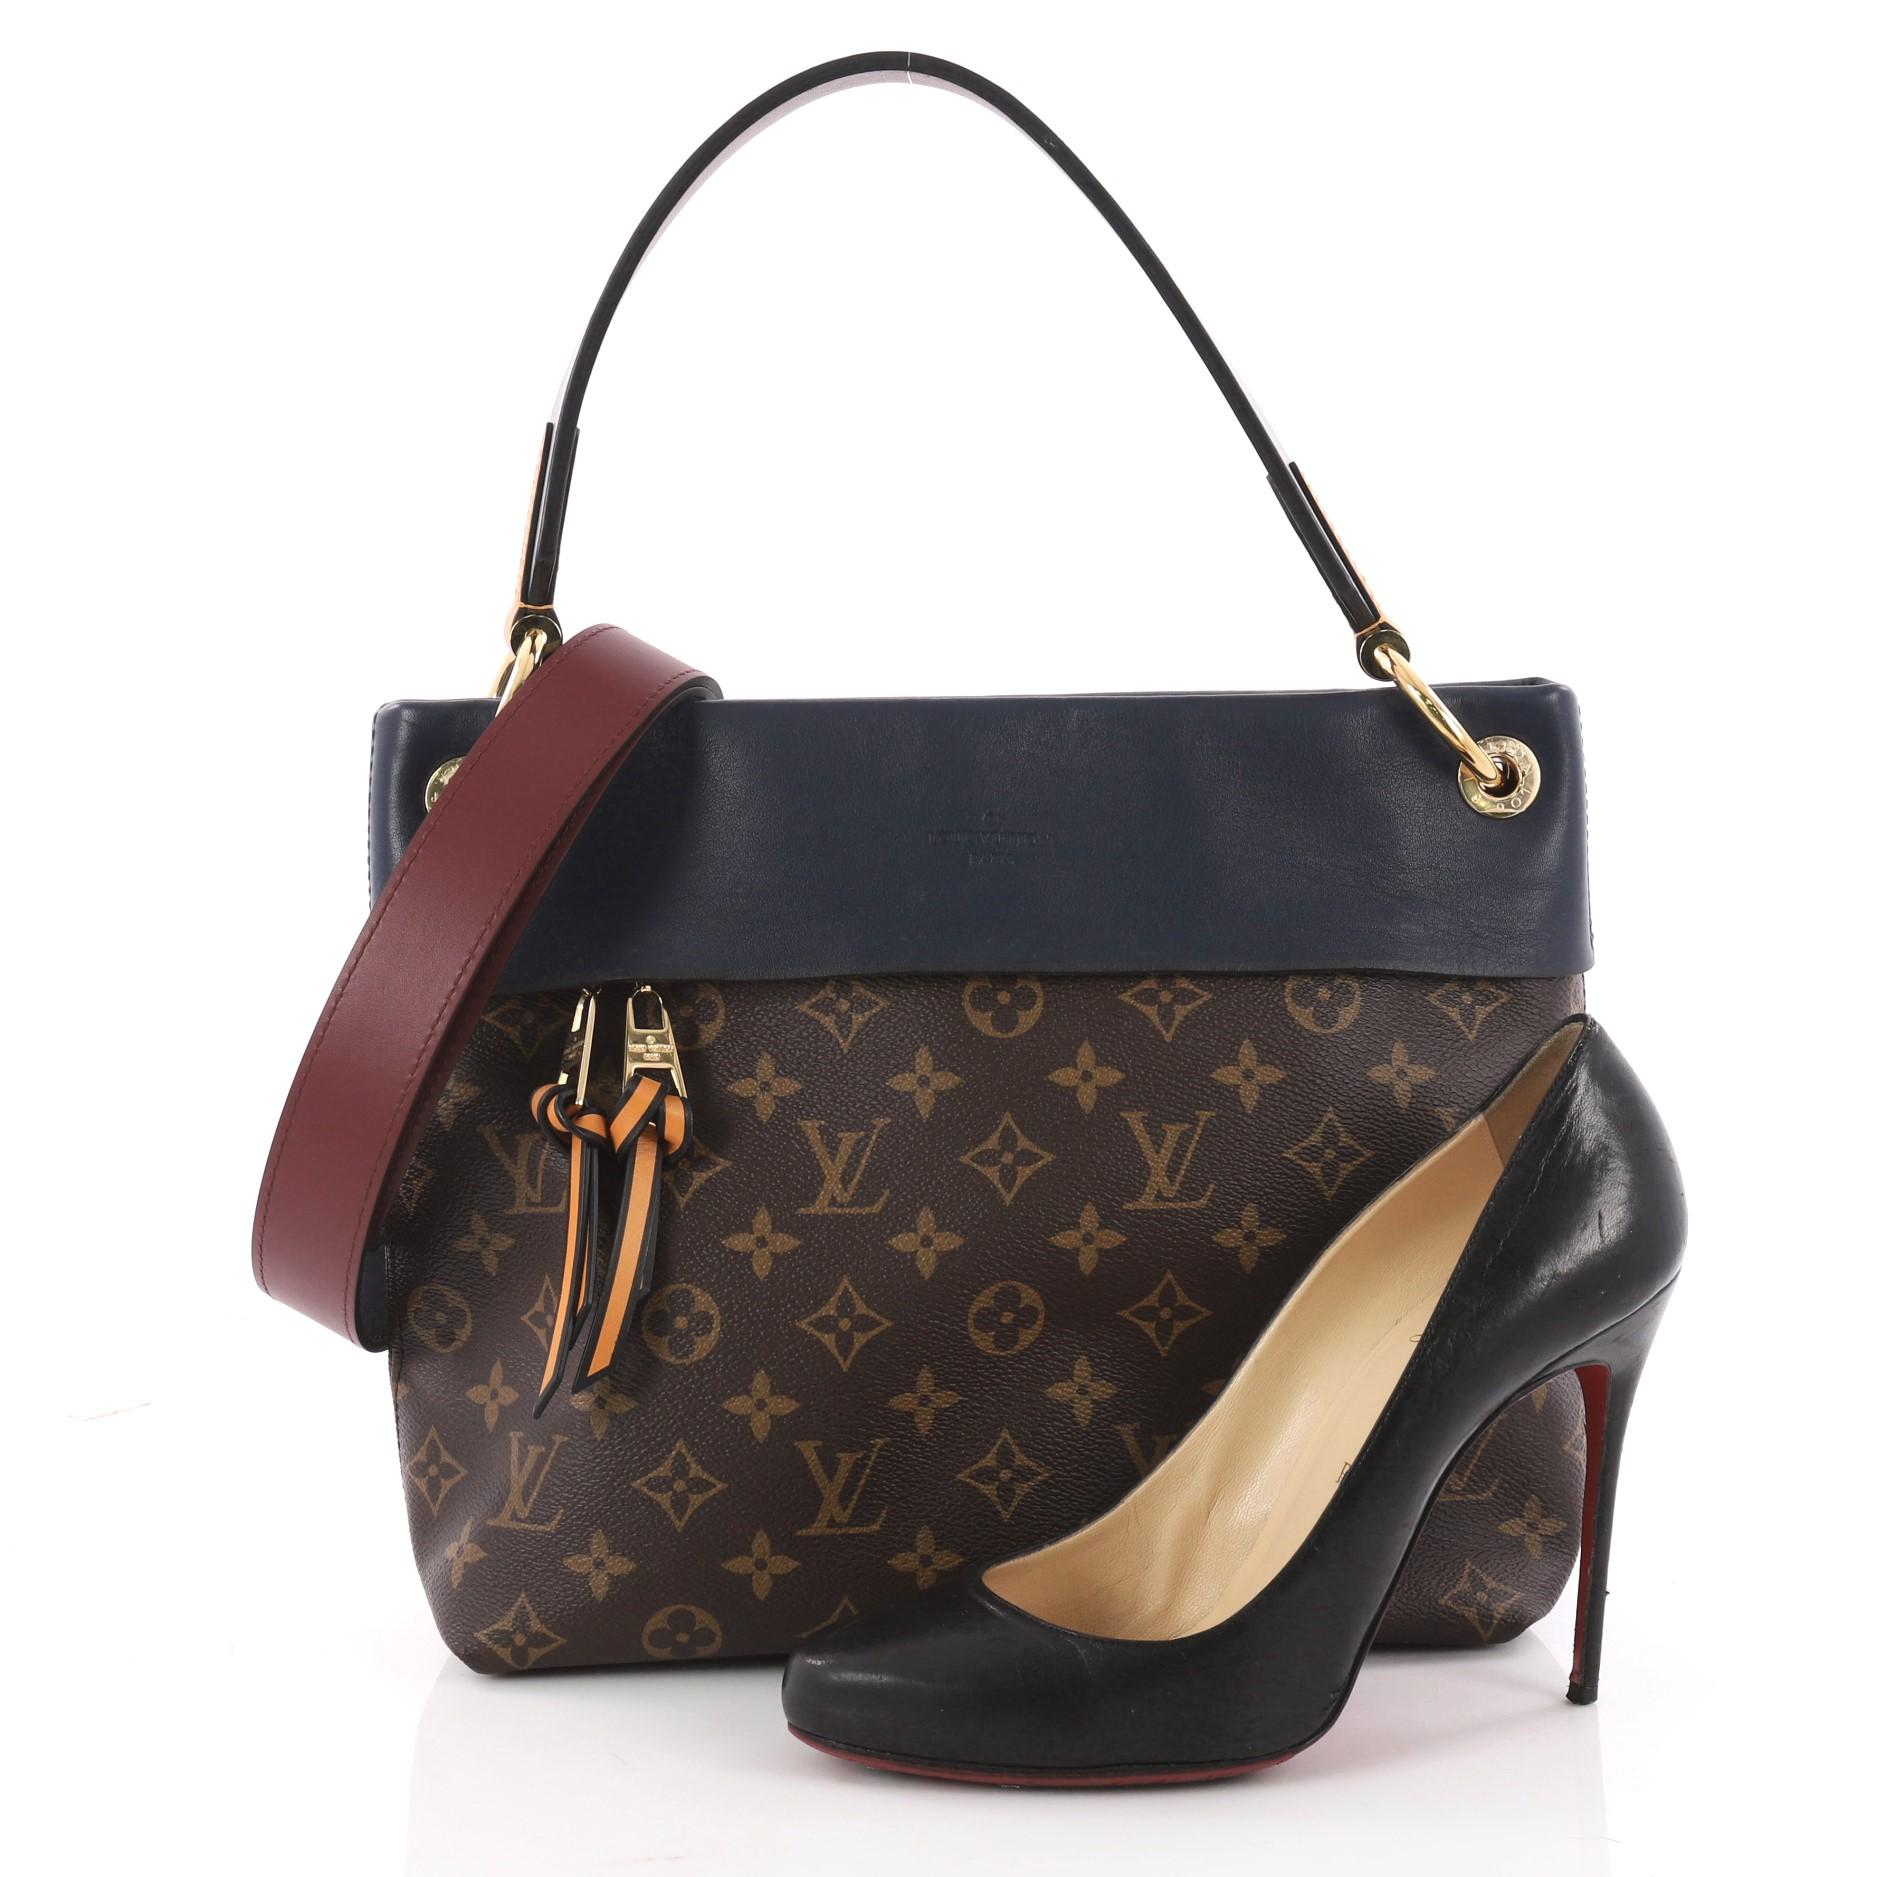 This authentic Louis Vuitton Tuileries Besace Bag Monogram Canvas with Leather was inspired by the Tuileries Gardens in Paris. Crafted from brown monogram coated canvas with leather trims, this ultra-functional bag features flat leather handle, long